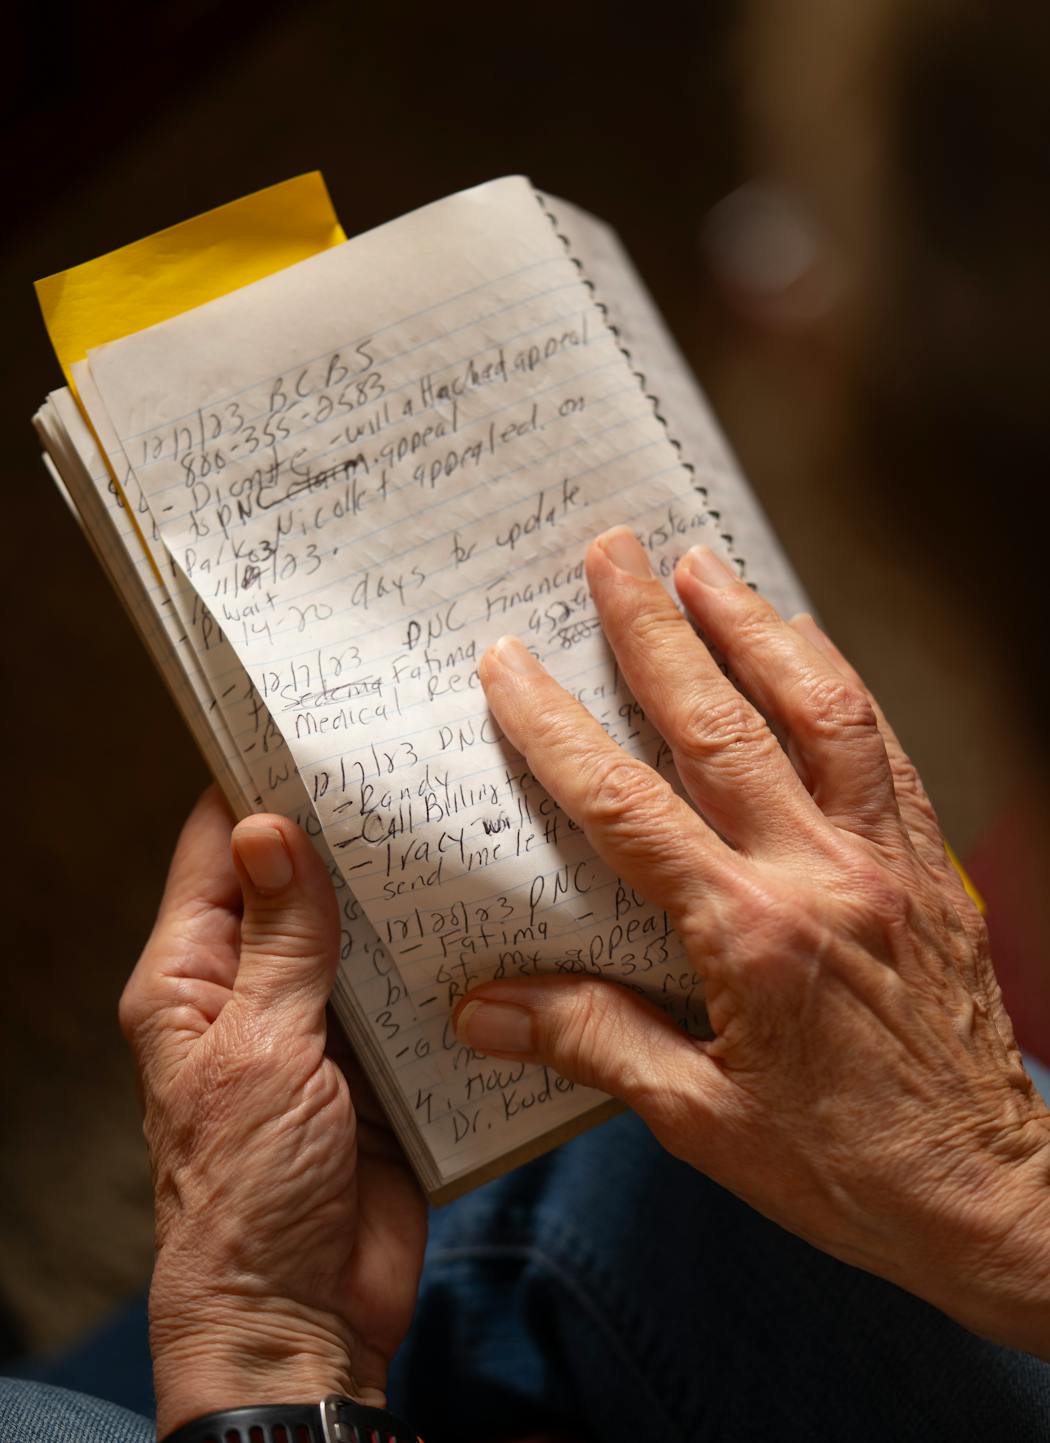 Christine Knirk, with the notebook she has kept while battling for insurance coverage, photographed in her Burnsville home on April 8. At issue is a sinus surgery performed in March 2023 that produced a good medical outcome, Knirk says, but her health insurer later said was not medically necessary.